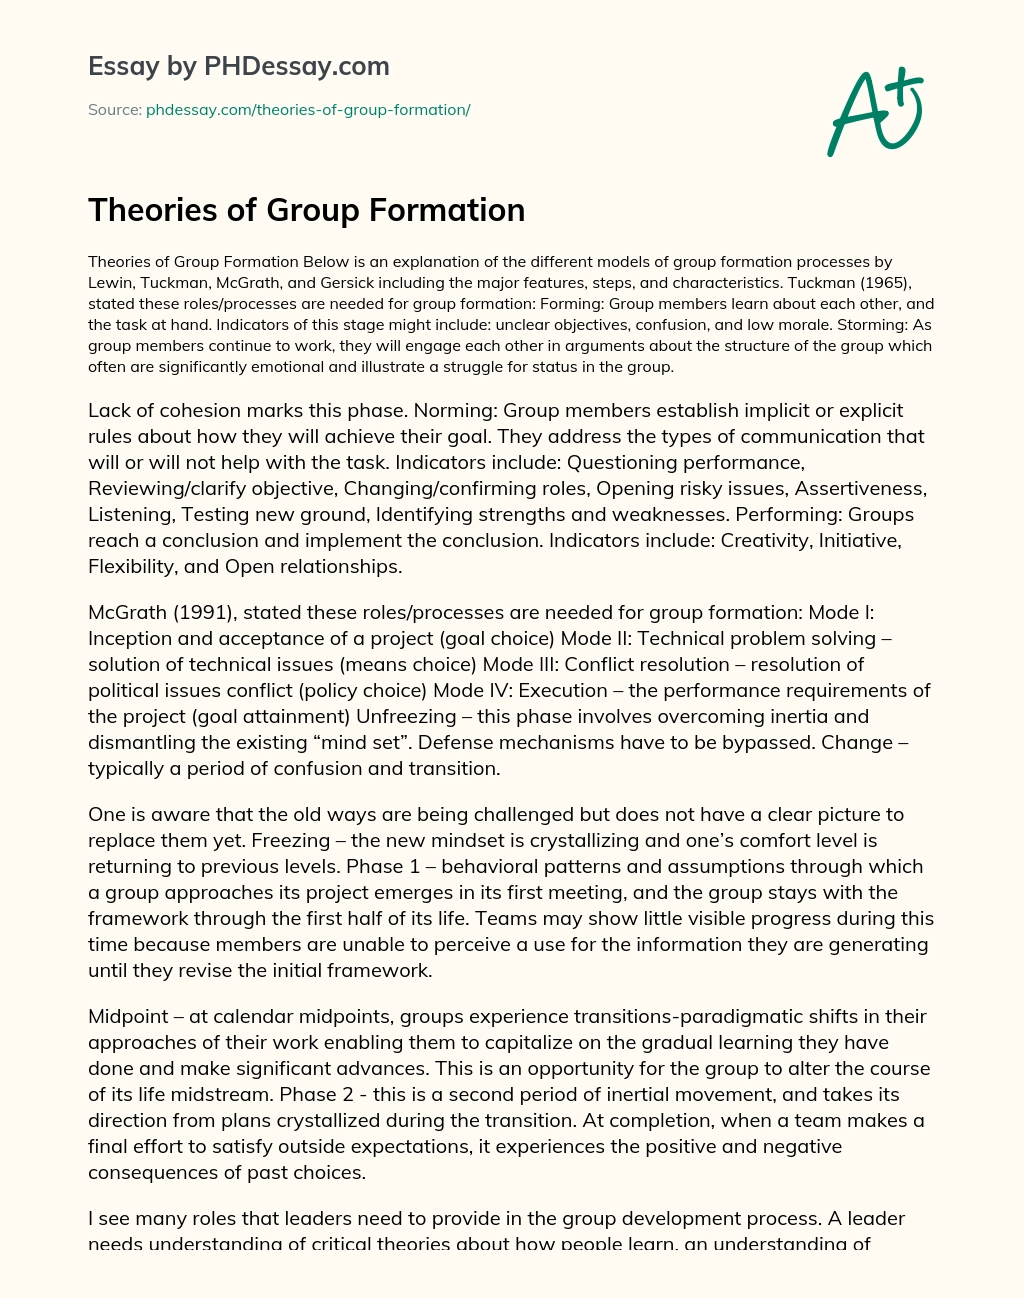 Theories of Group Formation essay